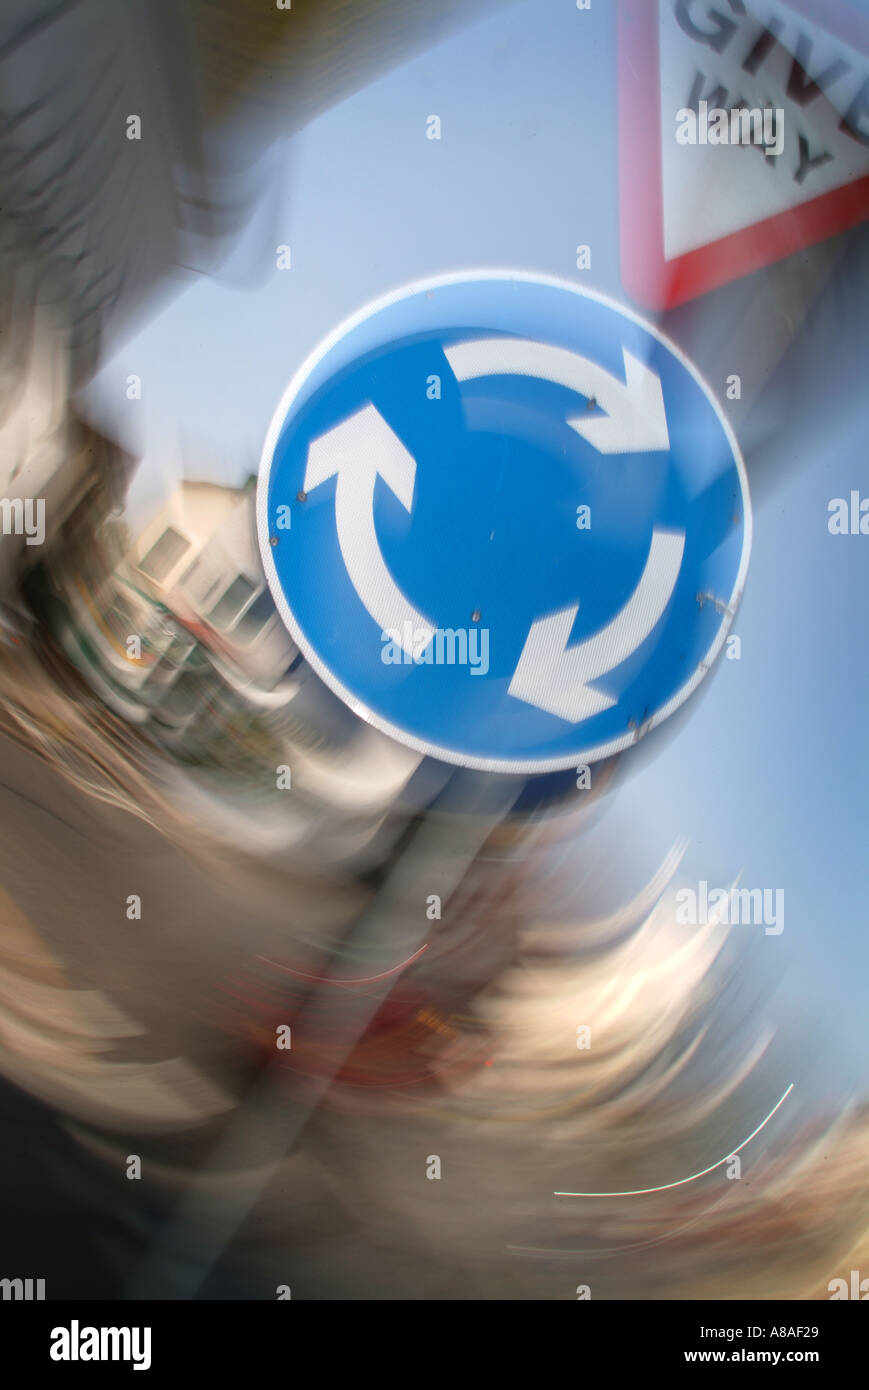 recycle, recycling, reuse, roundabout road sign motion blur concept road safety round in circles spin turn 360 degrees rotate Stock Photo